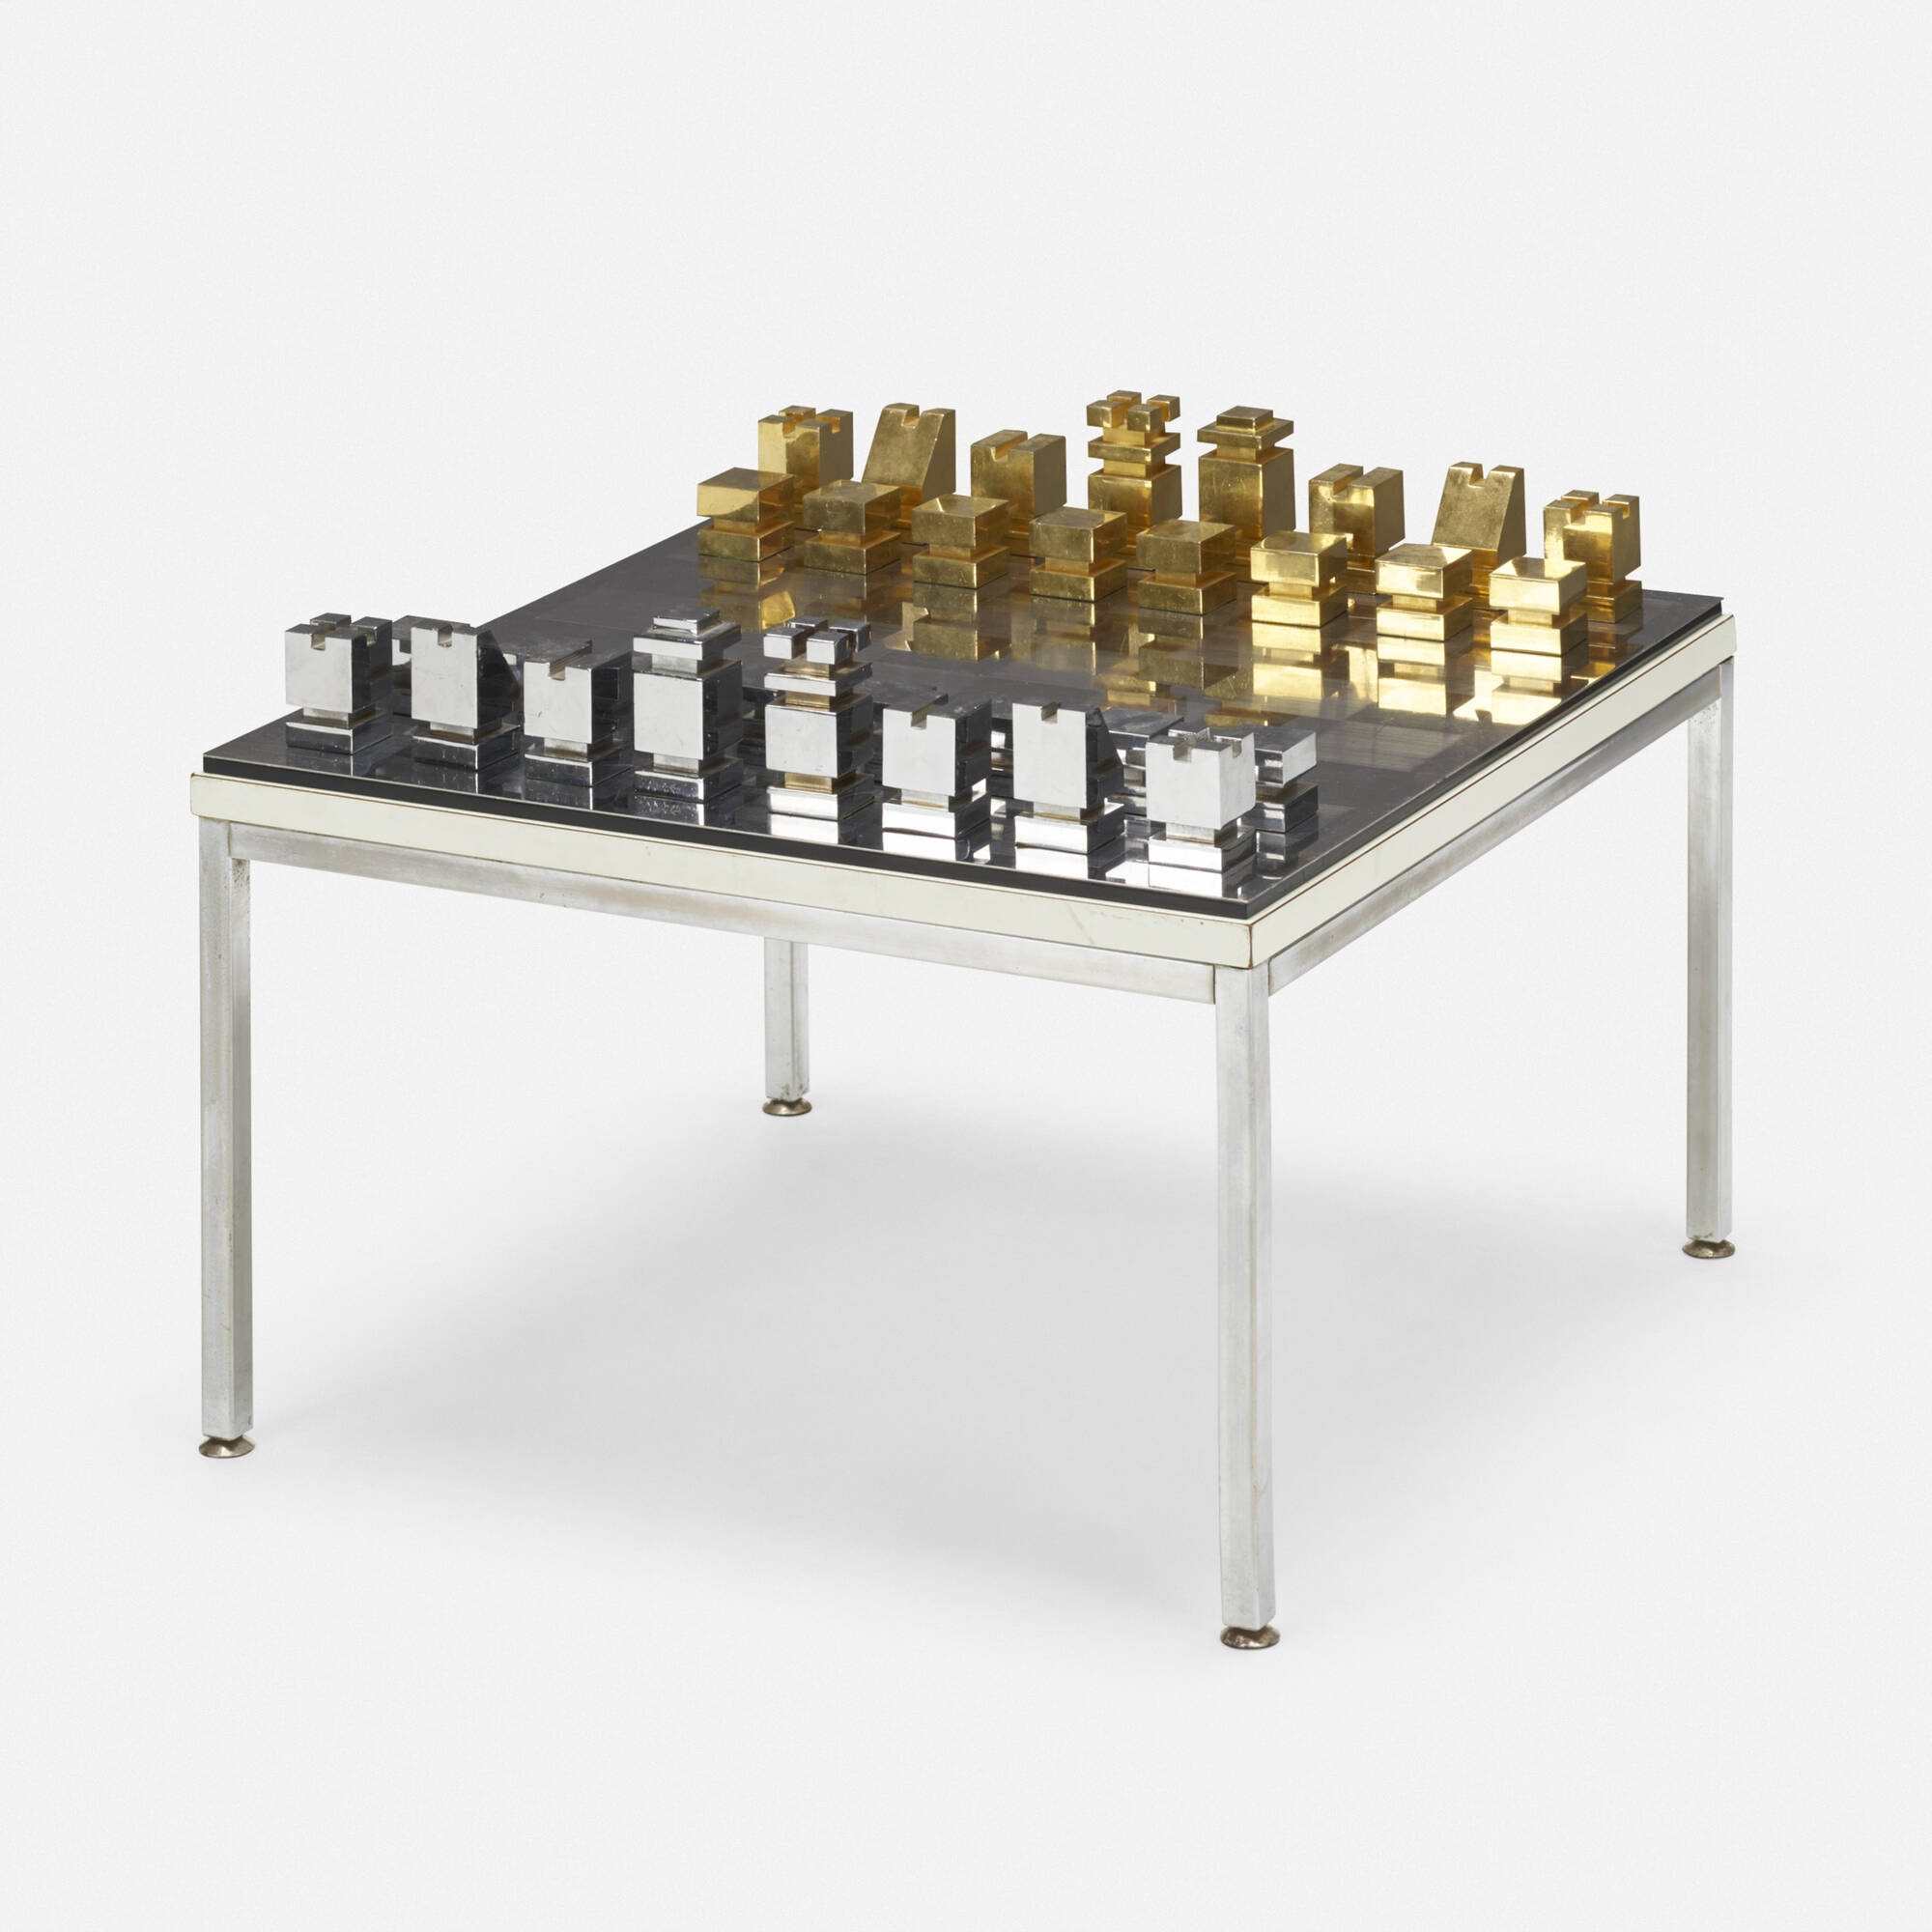 Sold at Auction: RENA DUMAS FOR HERMES CHESS SET, C 1985